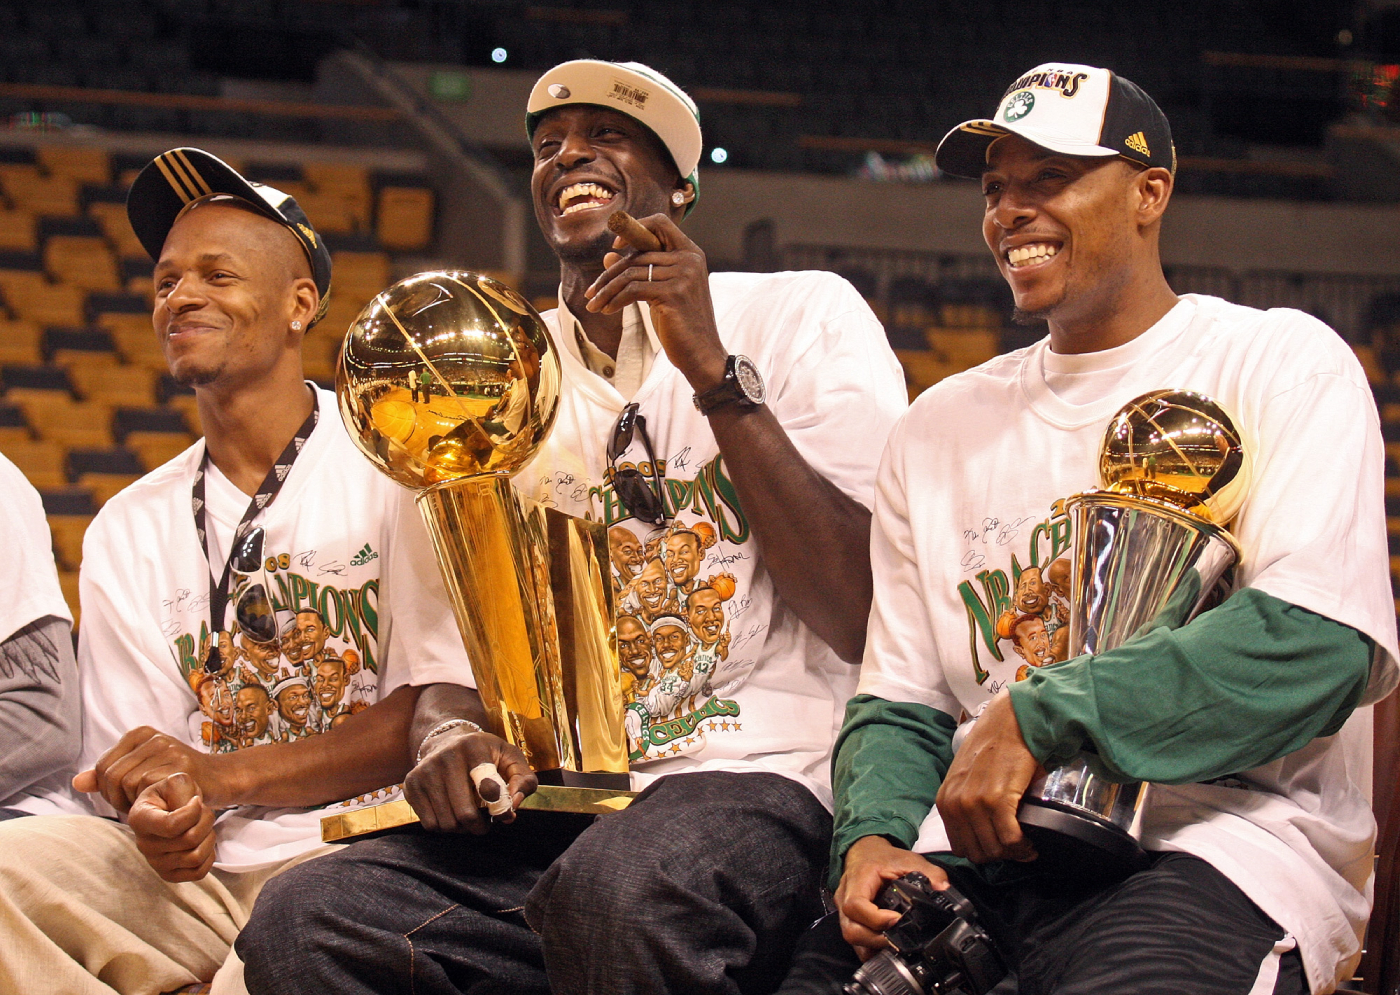 The Boston Celtics have one of the richest traditions in the NBA. So, how many NBA championships have the Celtics won?